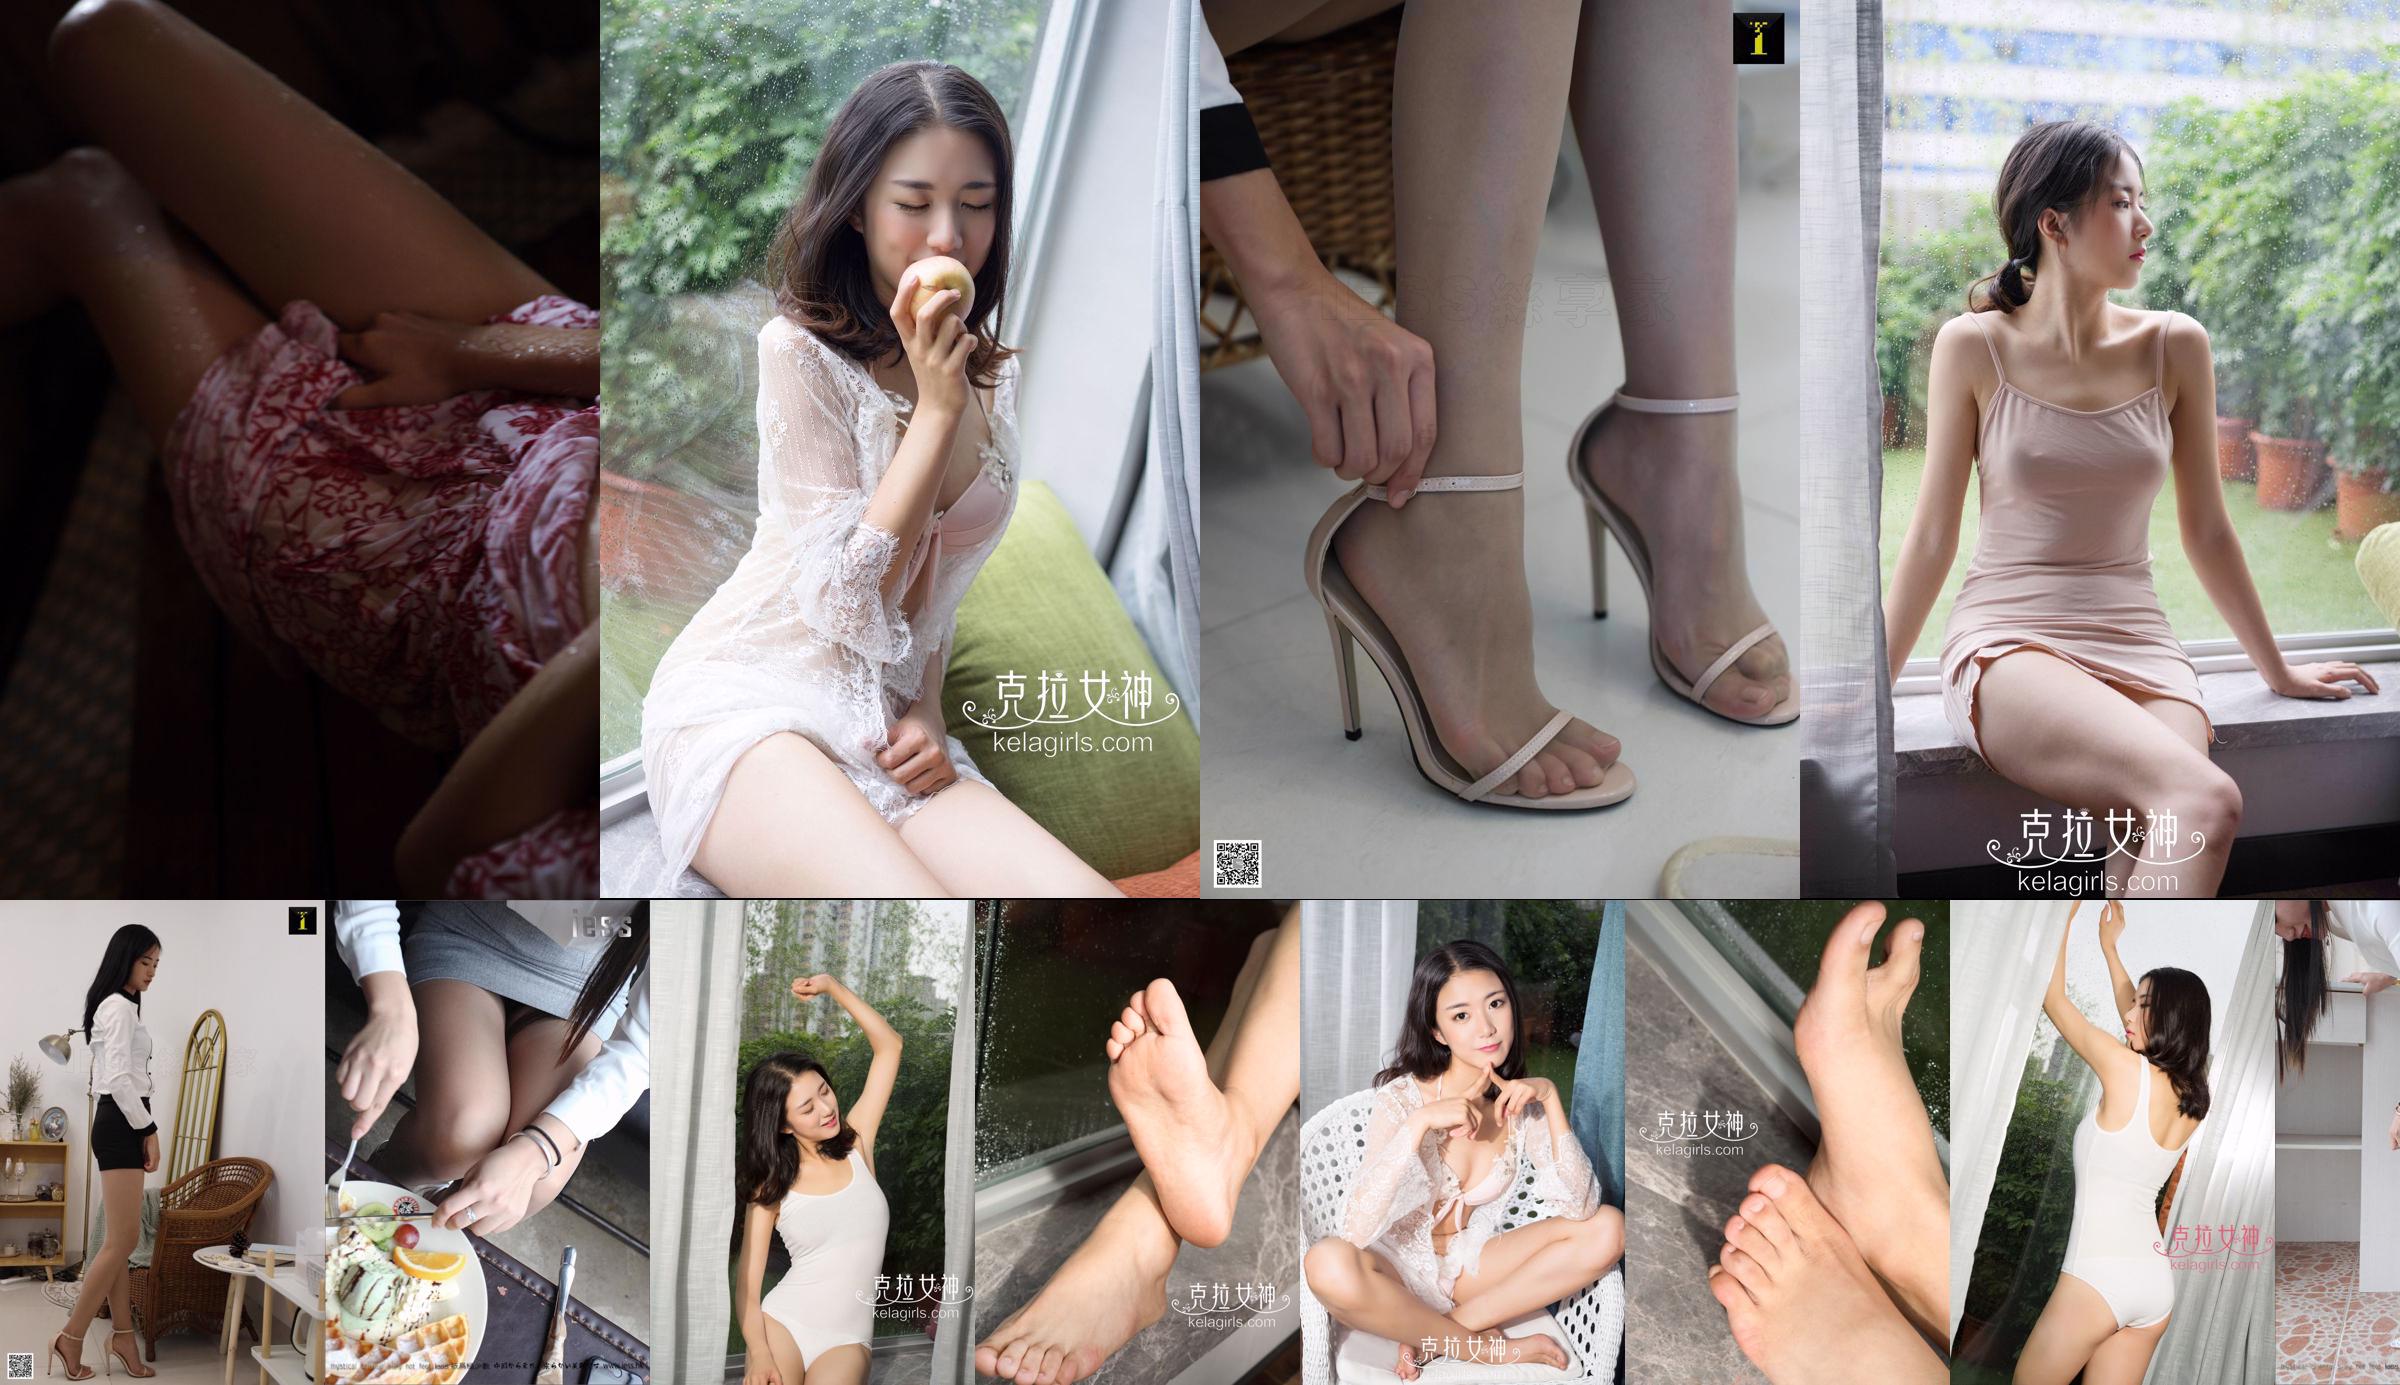 [Gentleman Photography] SS012 Ningning No.7be02f Page 26